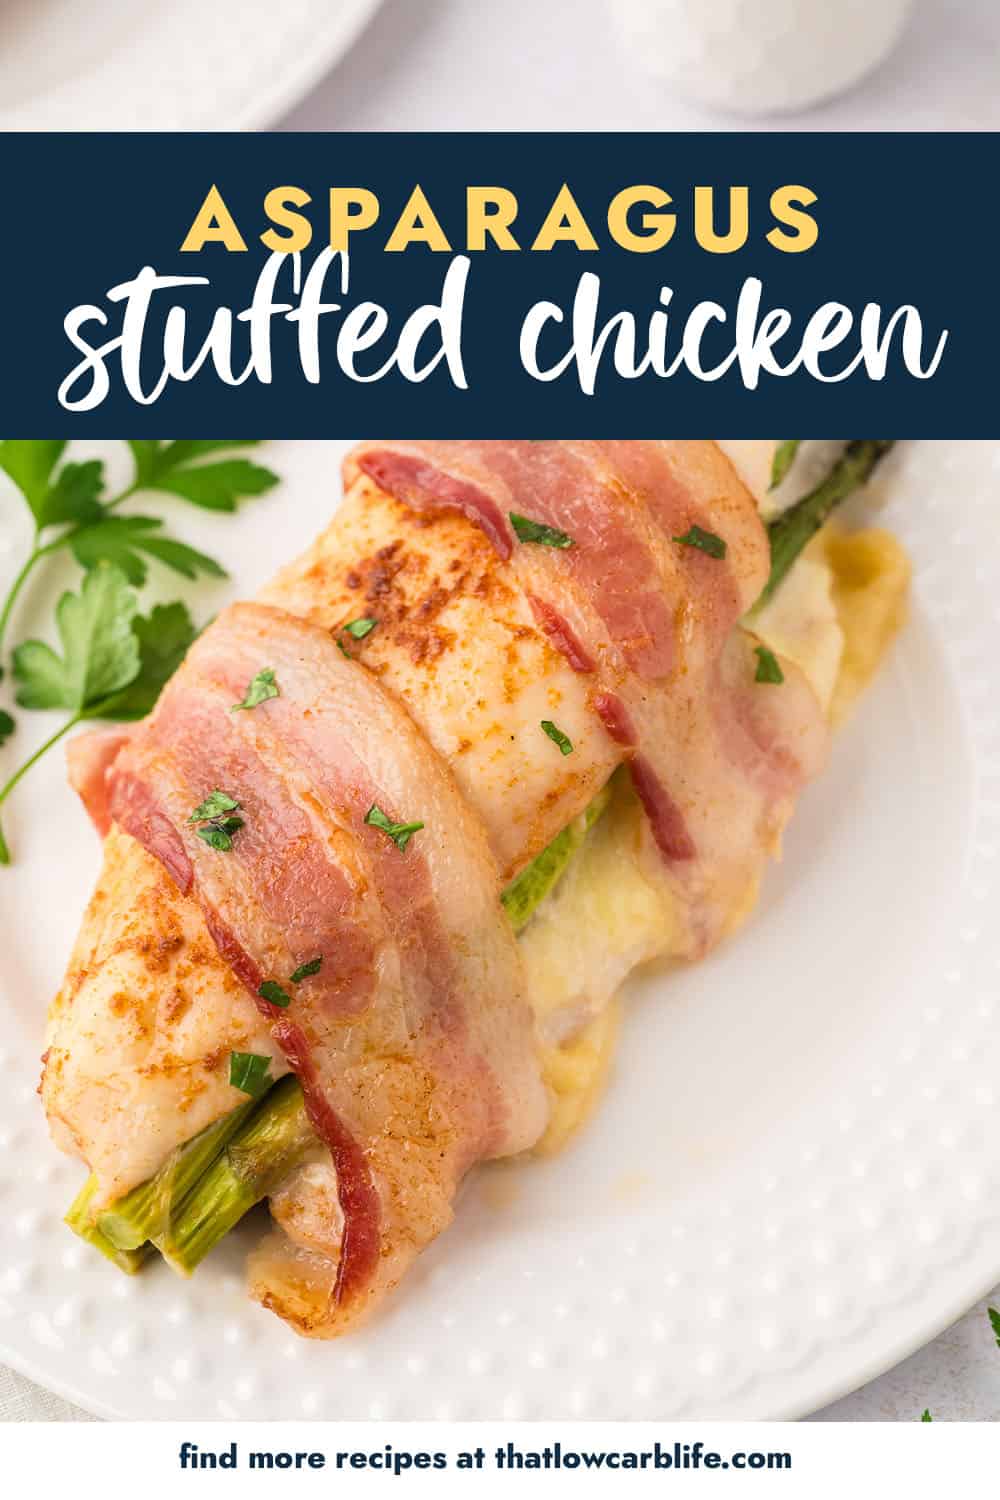 chicken stuffed with asparagus and wrapped in bacon on white plate